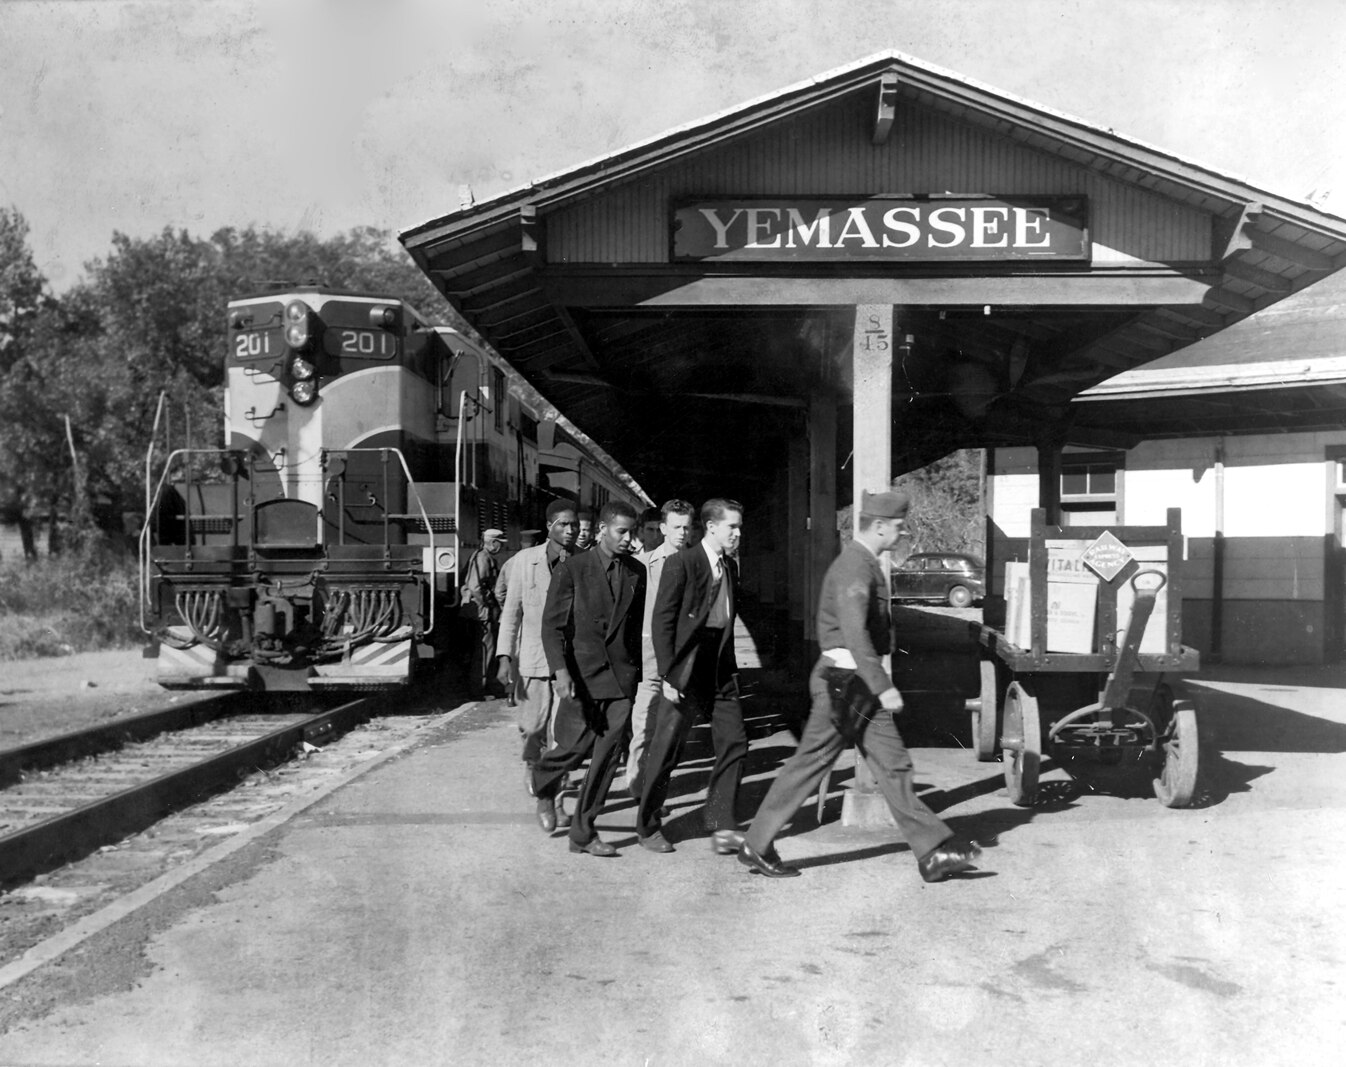 New recruits exit a train at the station in Yemassee, S.C., in the 1950's. Depending on when they arrived, the recruits would either spend the night in a barracks in Yemassee or they would be processed and sent directly to Parris Island by way of bus or cattle car. The use of the Yemassee train station ended in June 1965.